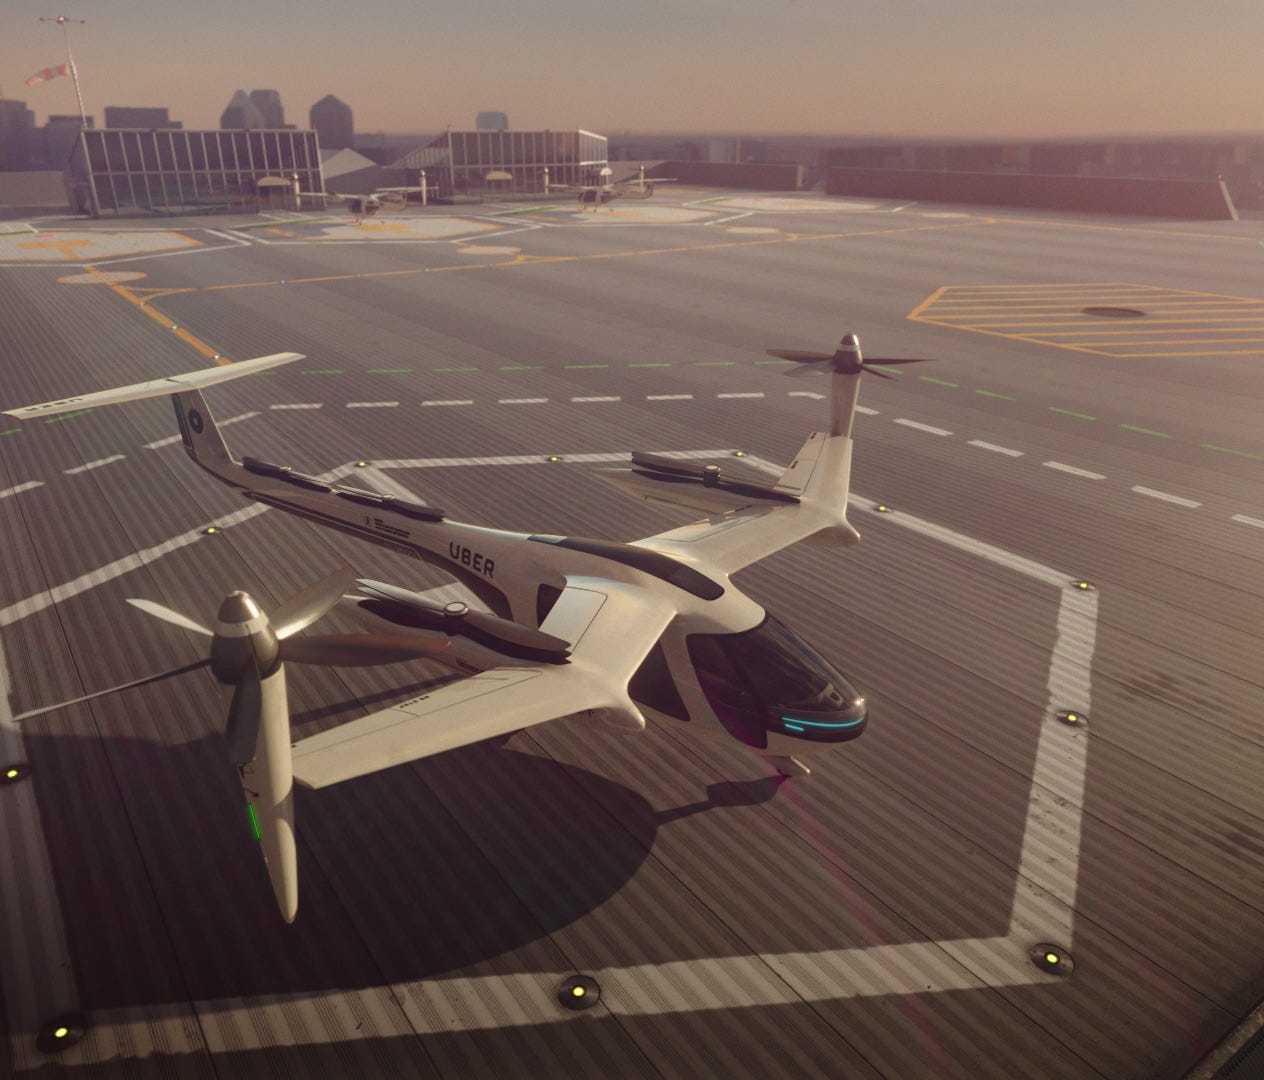 Uber announced it will bring flying cars to Dallas and now Los Angeles by 2020.